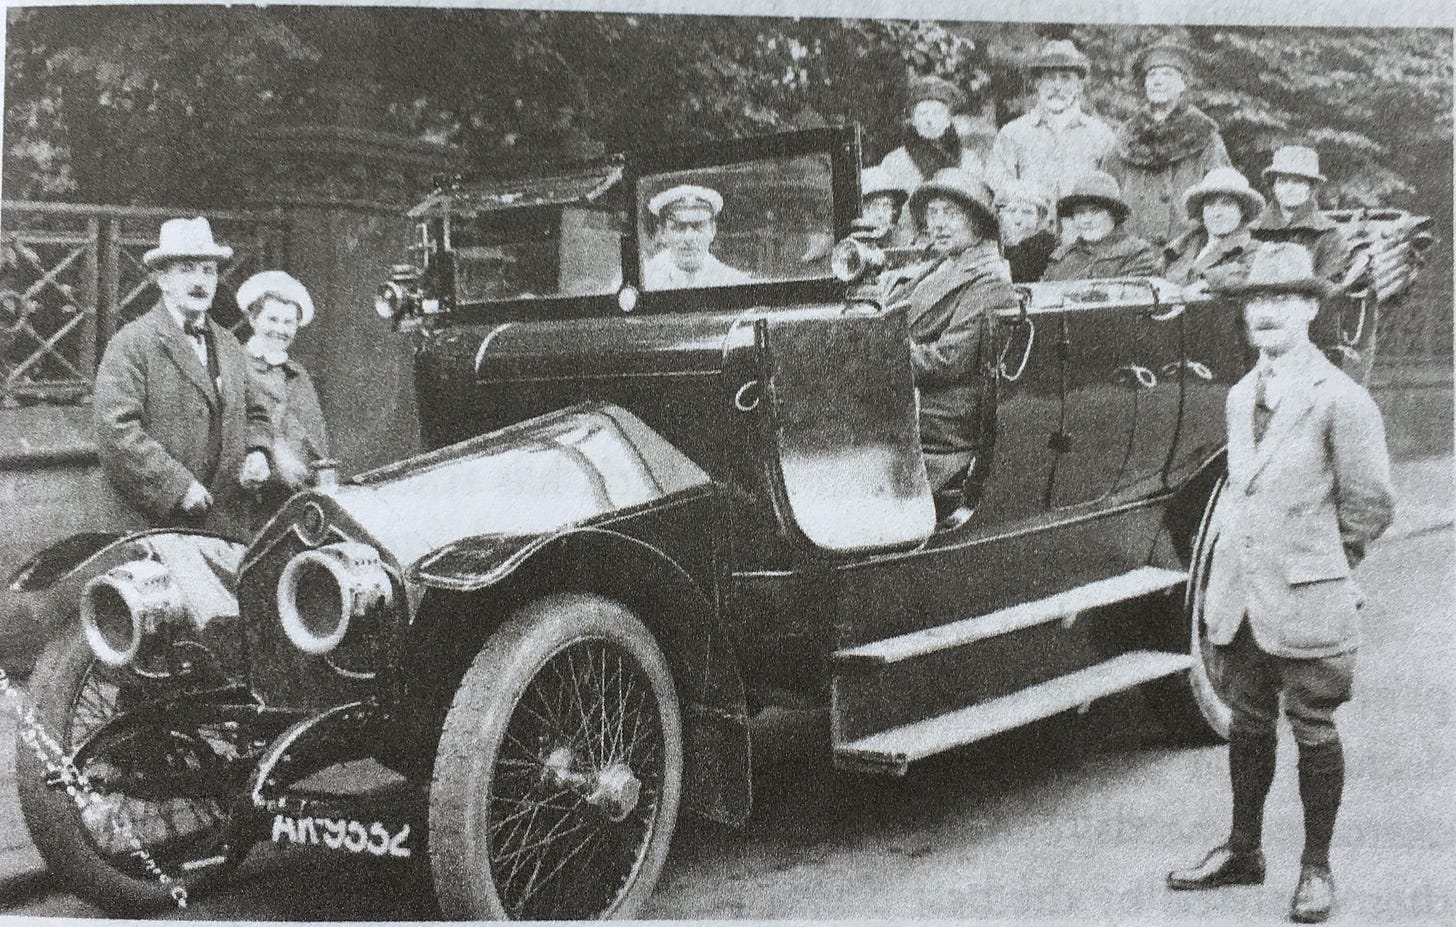 A posed photo of people riding in a charabanc, or large convertible bus. black and white.